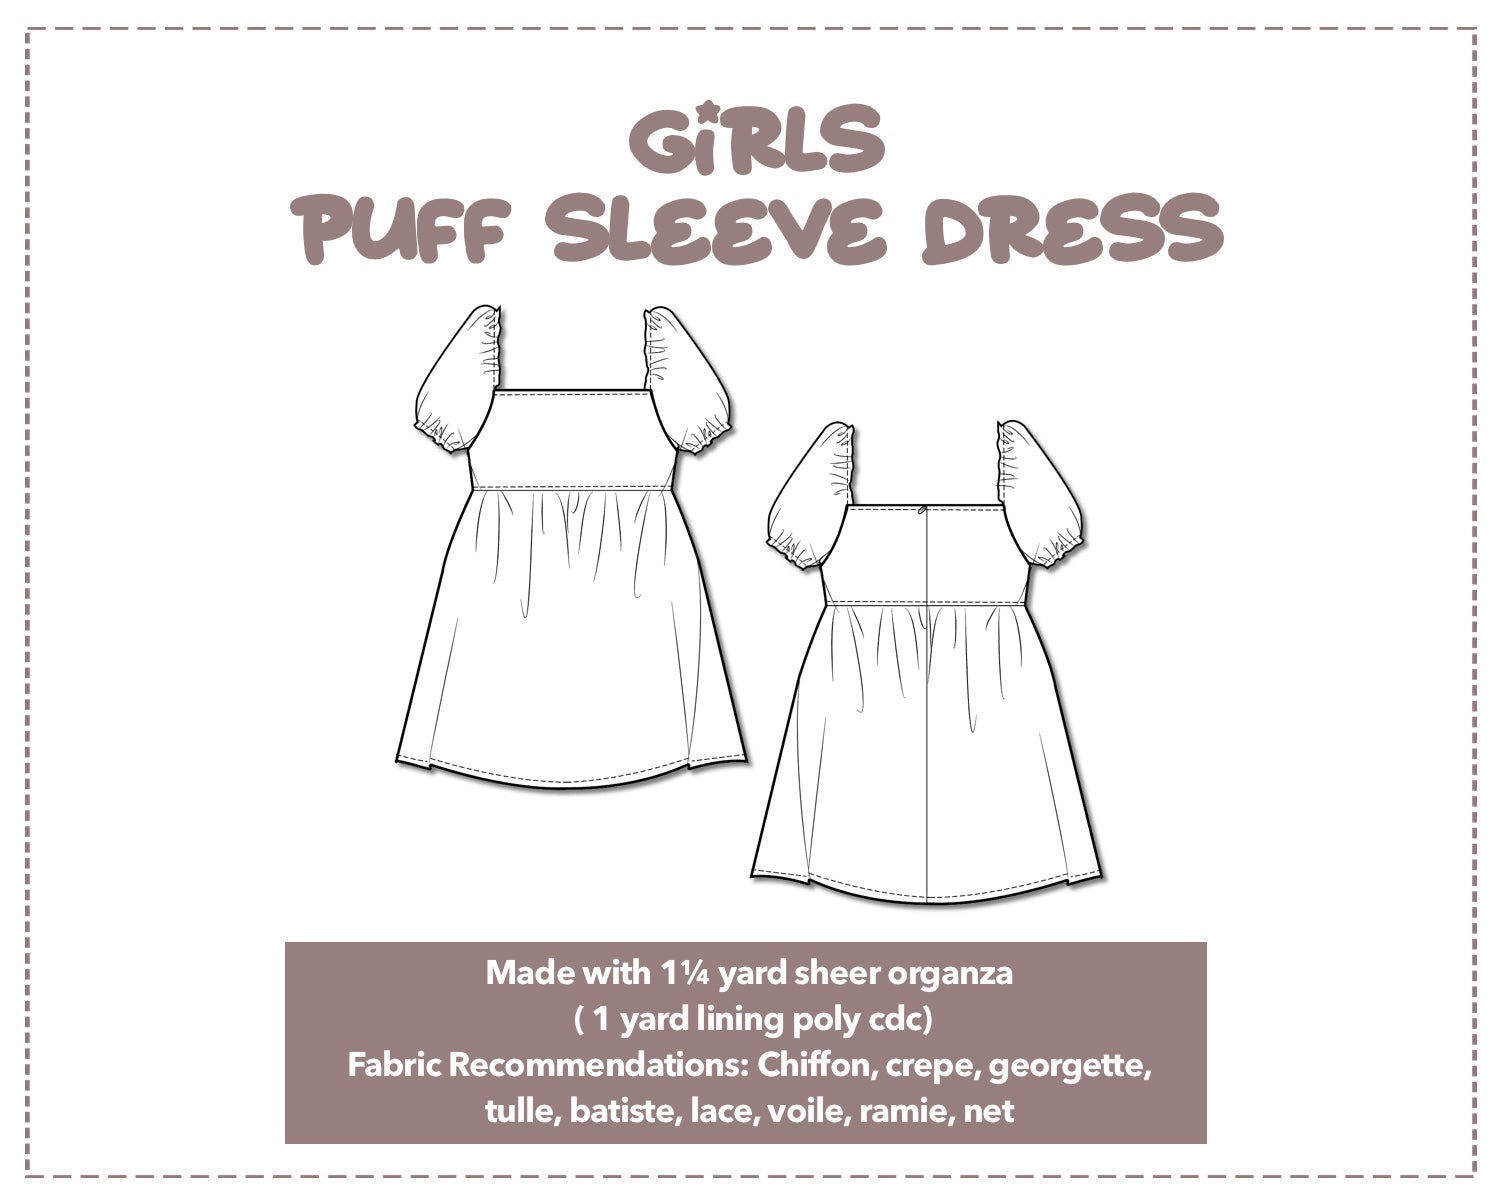 Illustration and detailed description for Girls Puff Sleeve Square Neck Dress sewing pattern.